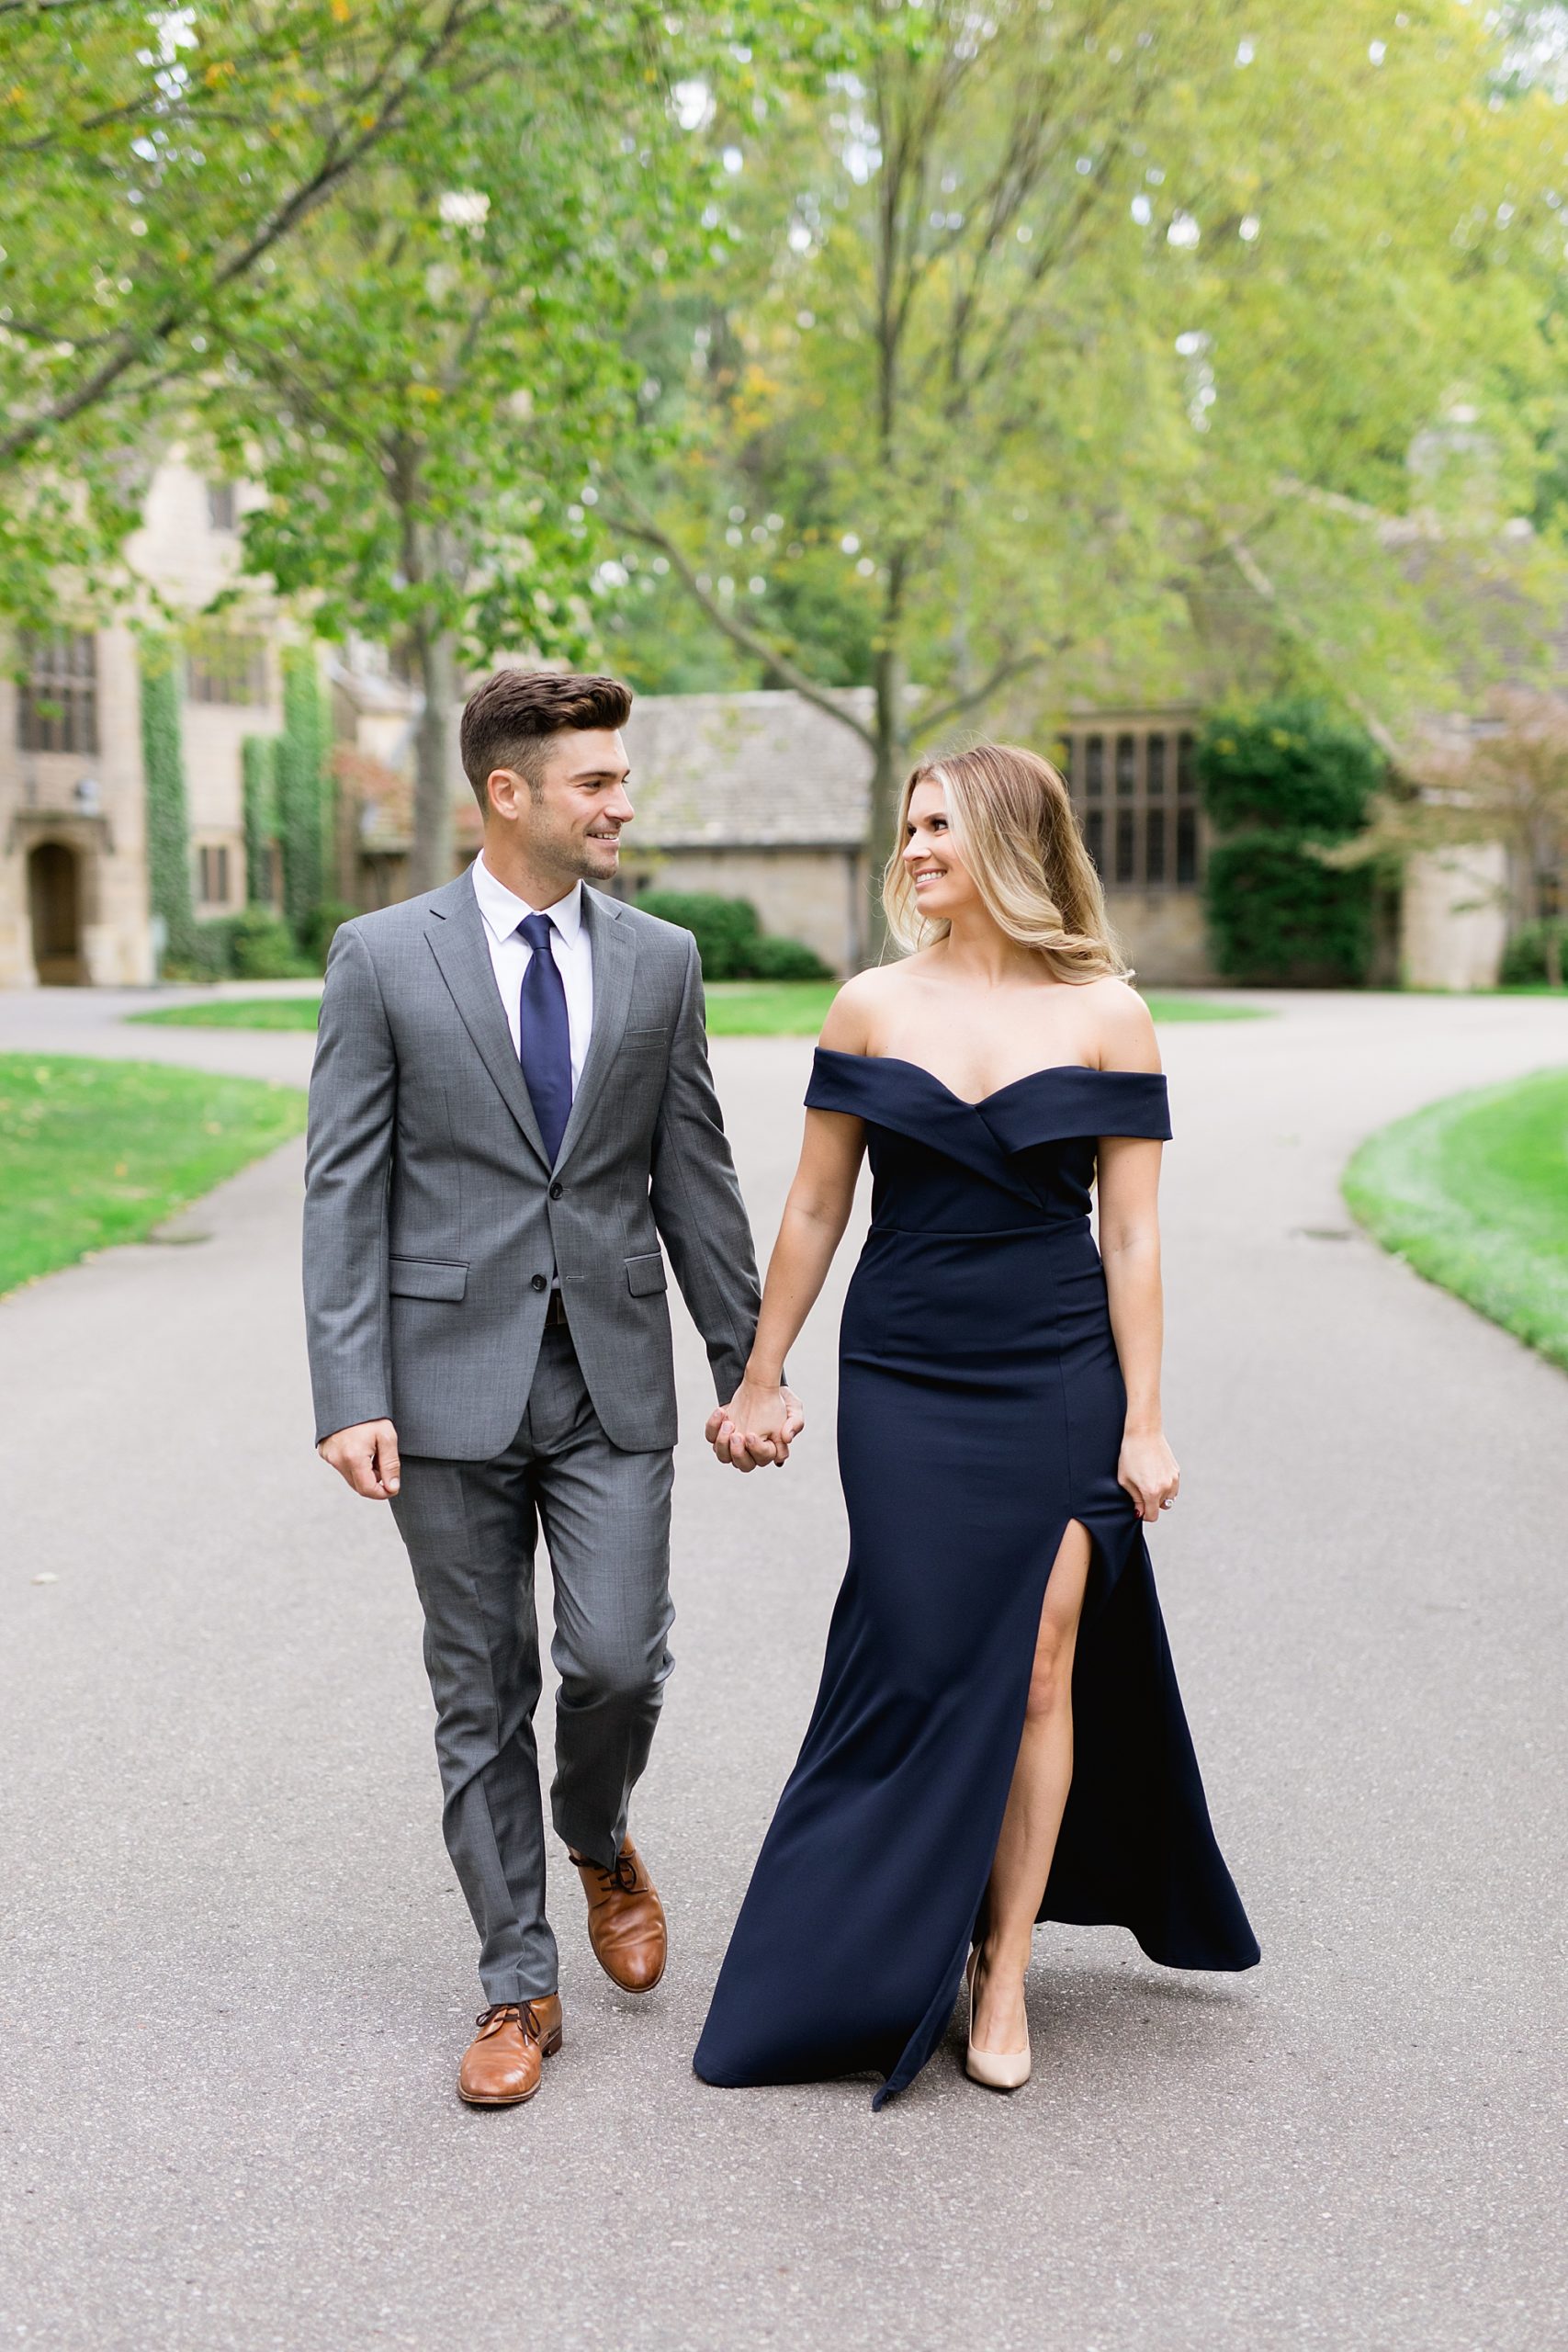 Formal Engagement Photos | Ford House Gardens | Breanne Rochelle Photography